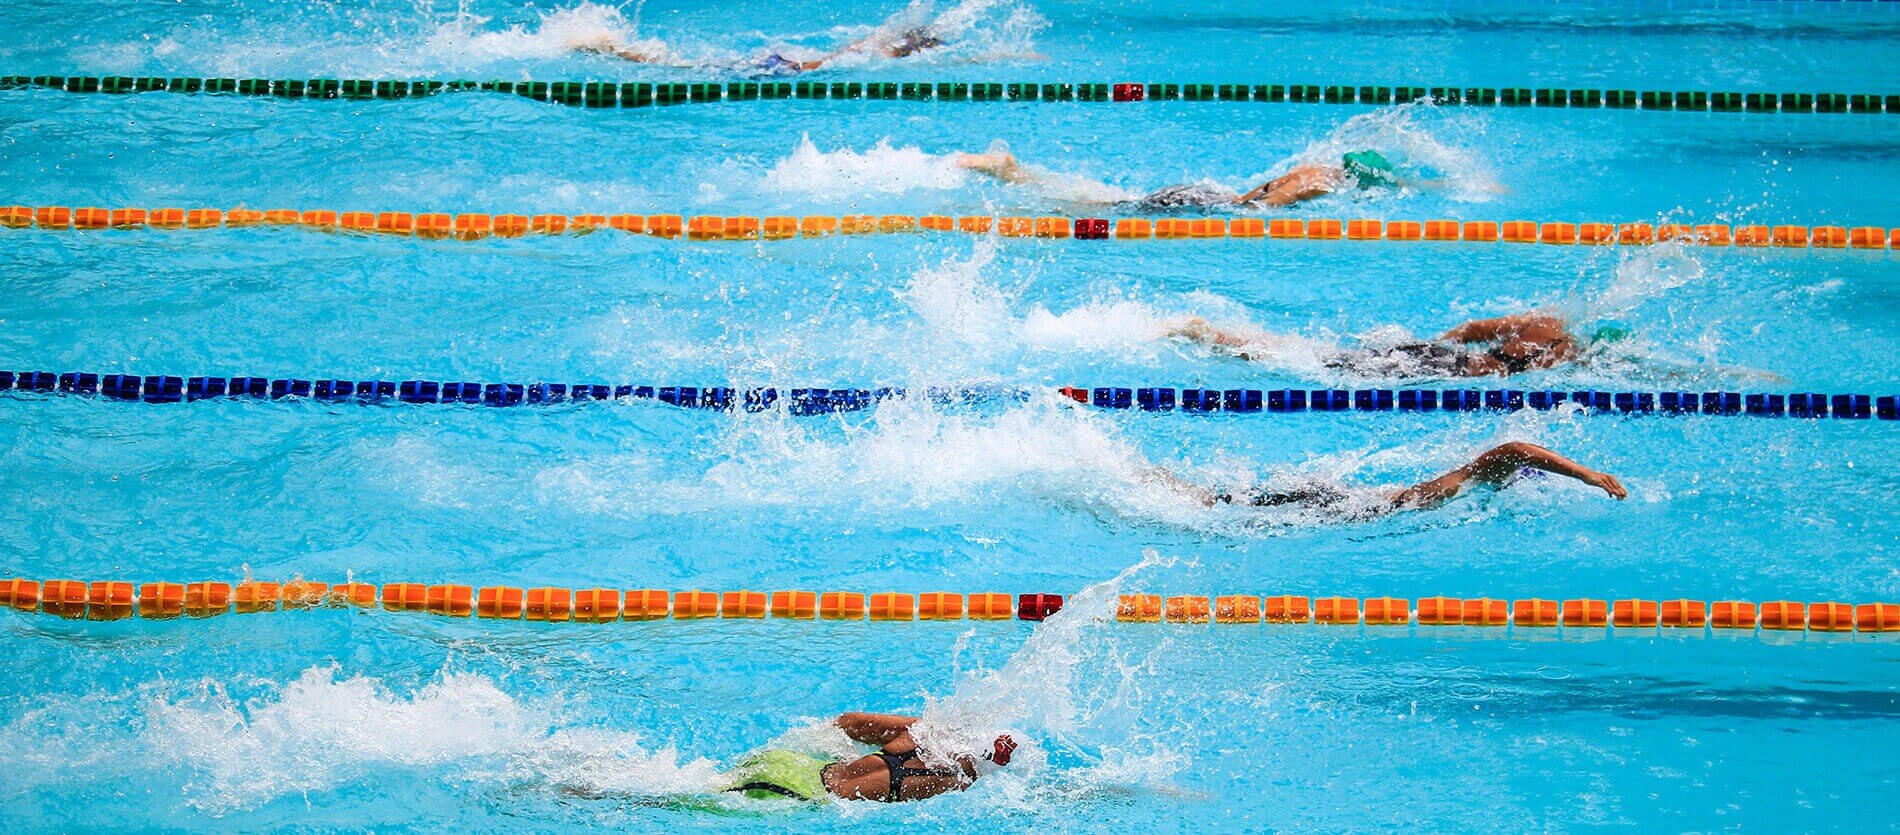 Five people competing in a swimming race